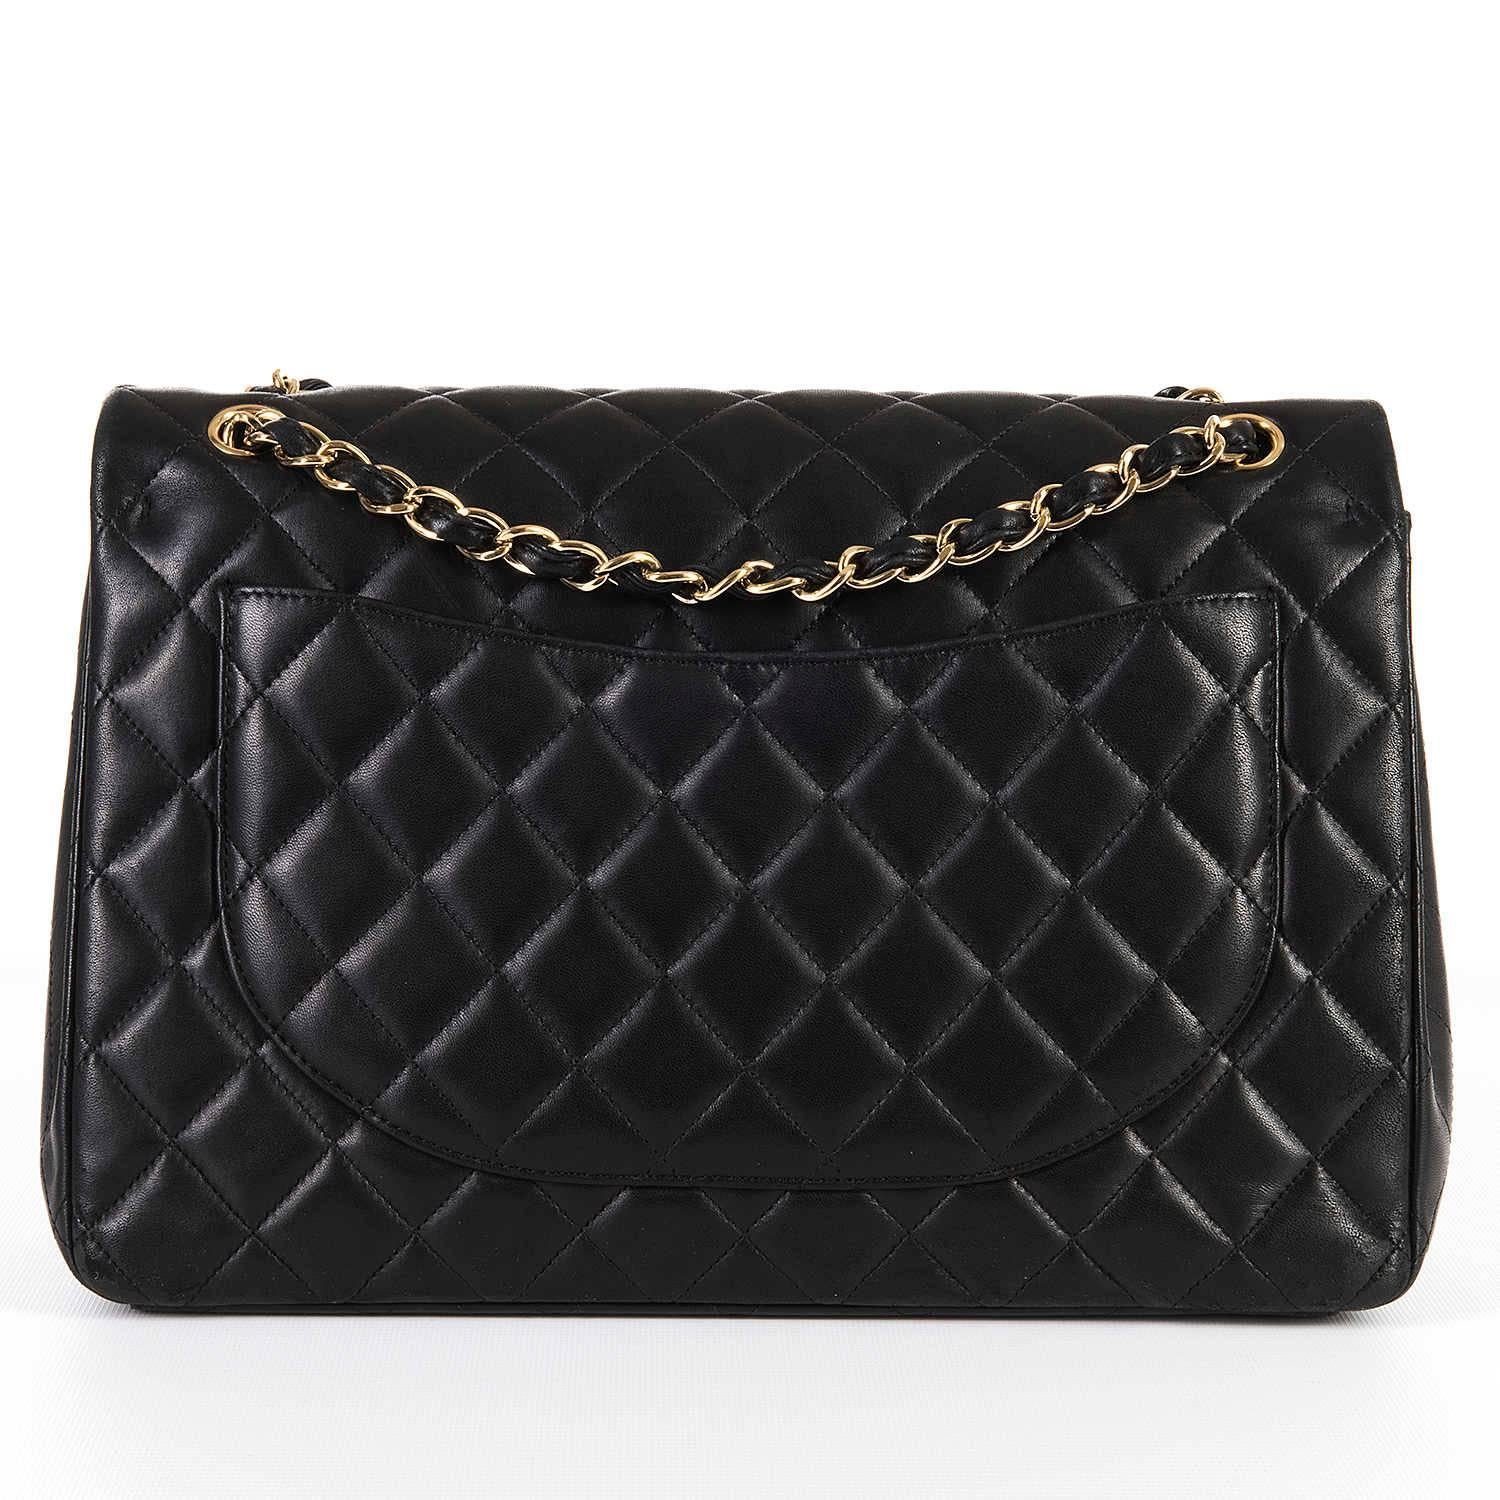 The Classic Chanel Black 'Maxi' Quilted, Double-Flap 'Sac Timeless' with Gold Hardware. In excellent condition, the bag comes with it's Chanel authenticity card and dust sack. Circa 2012, the bag's serial number is 16288391.